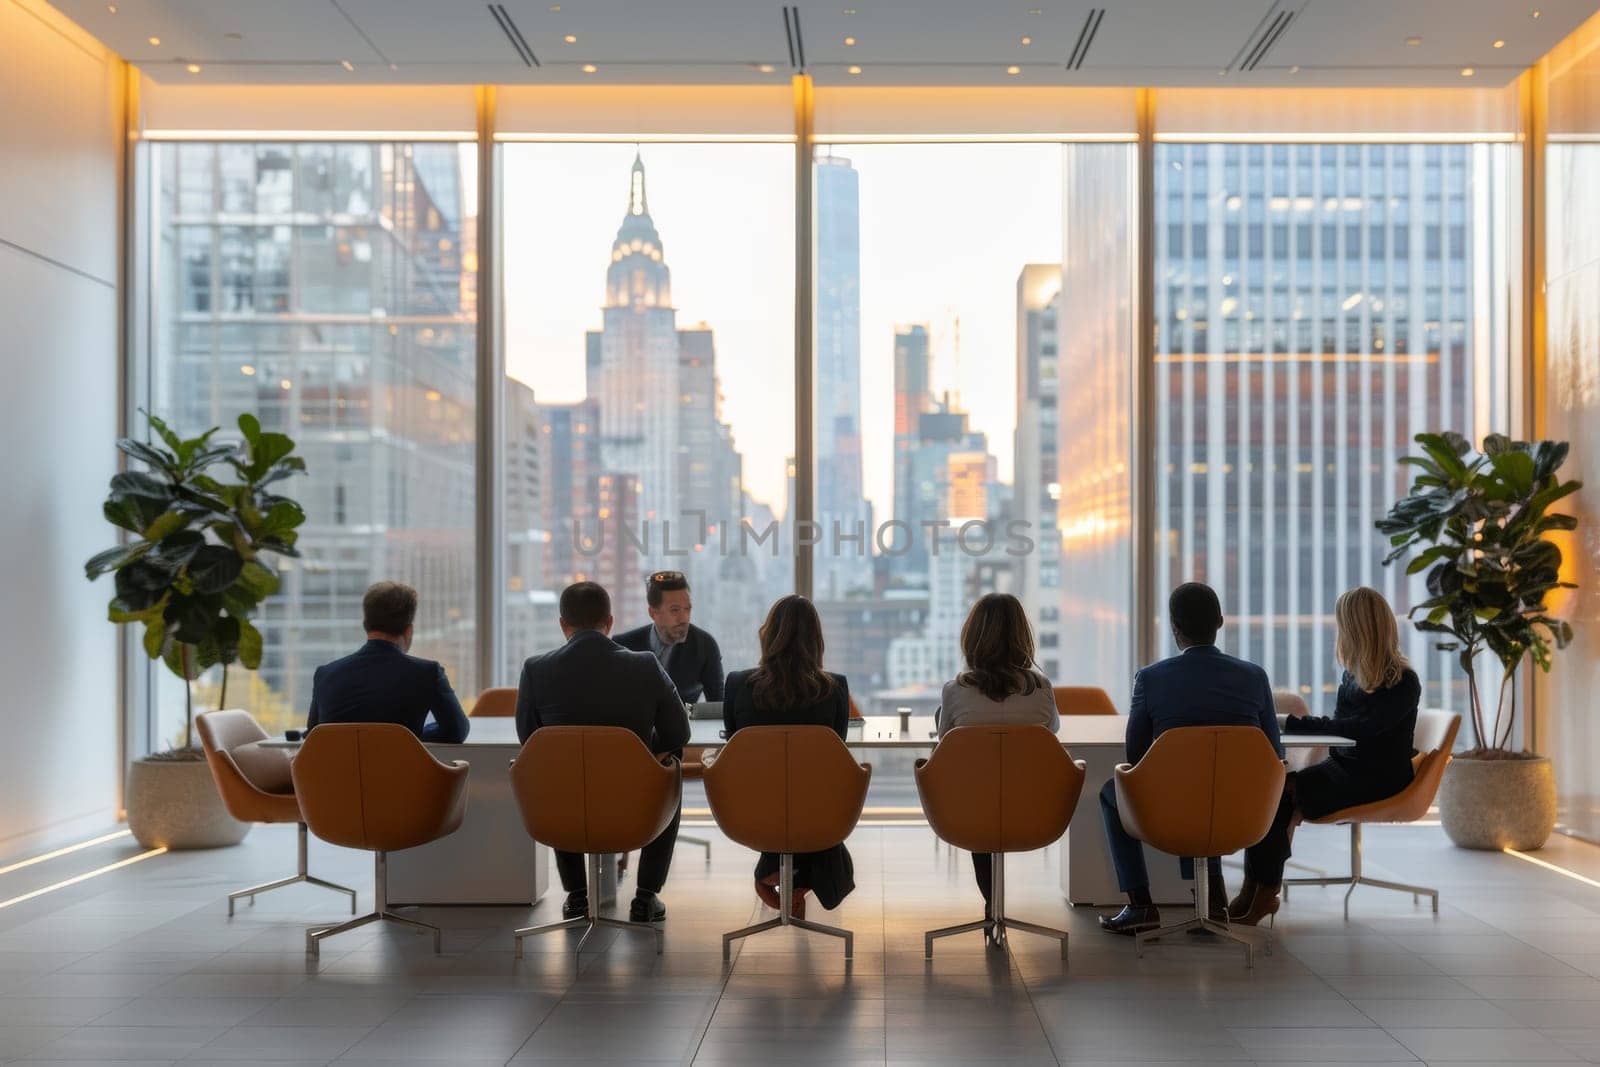 A group of people are sitting in a conference room with a view of the city. Scene is professional and focused, as the group is gathered for a meeting